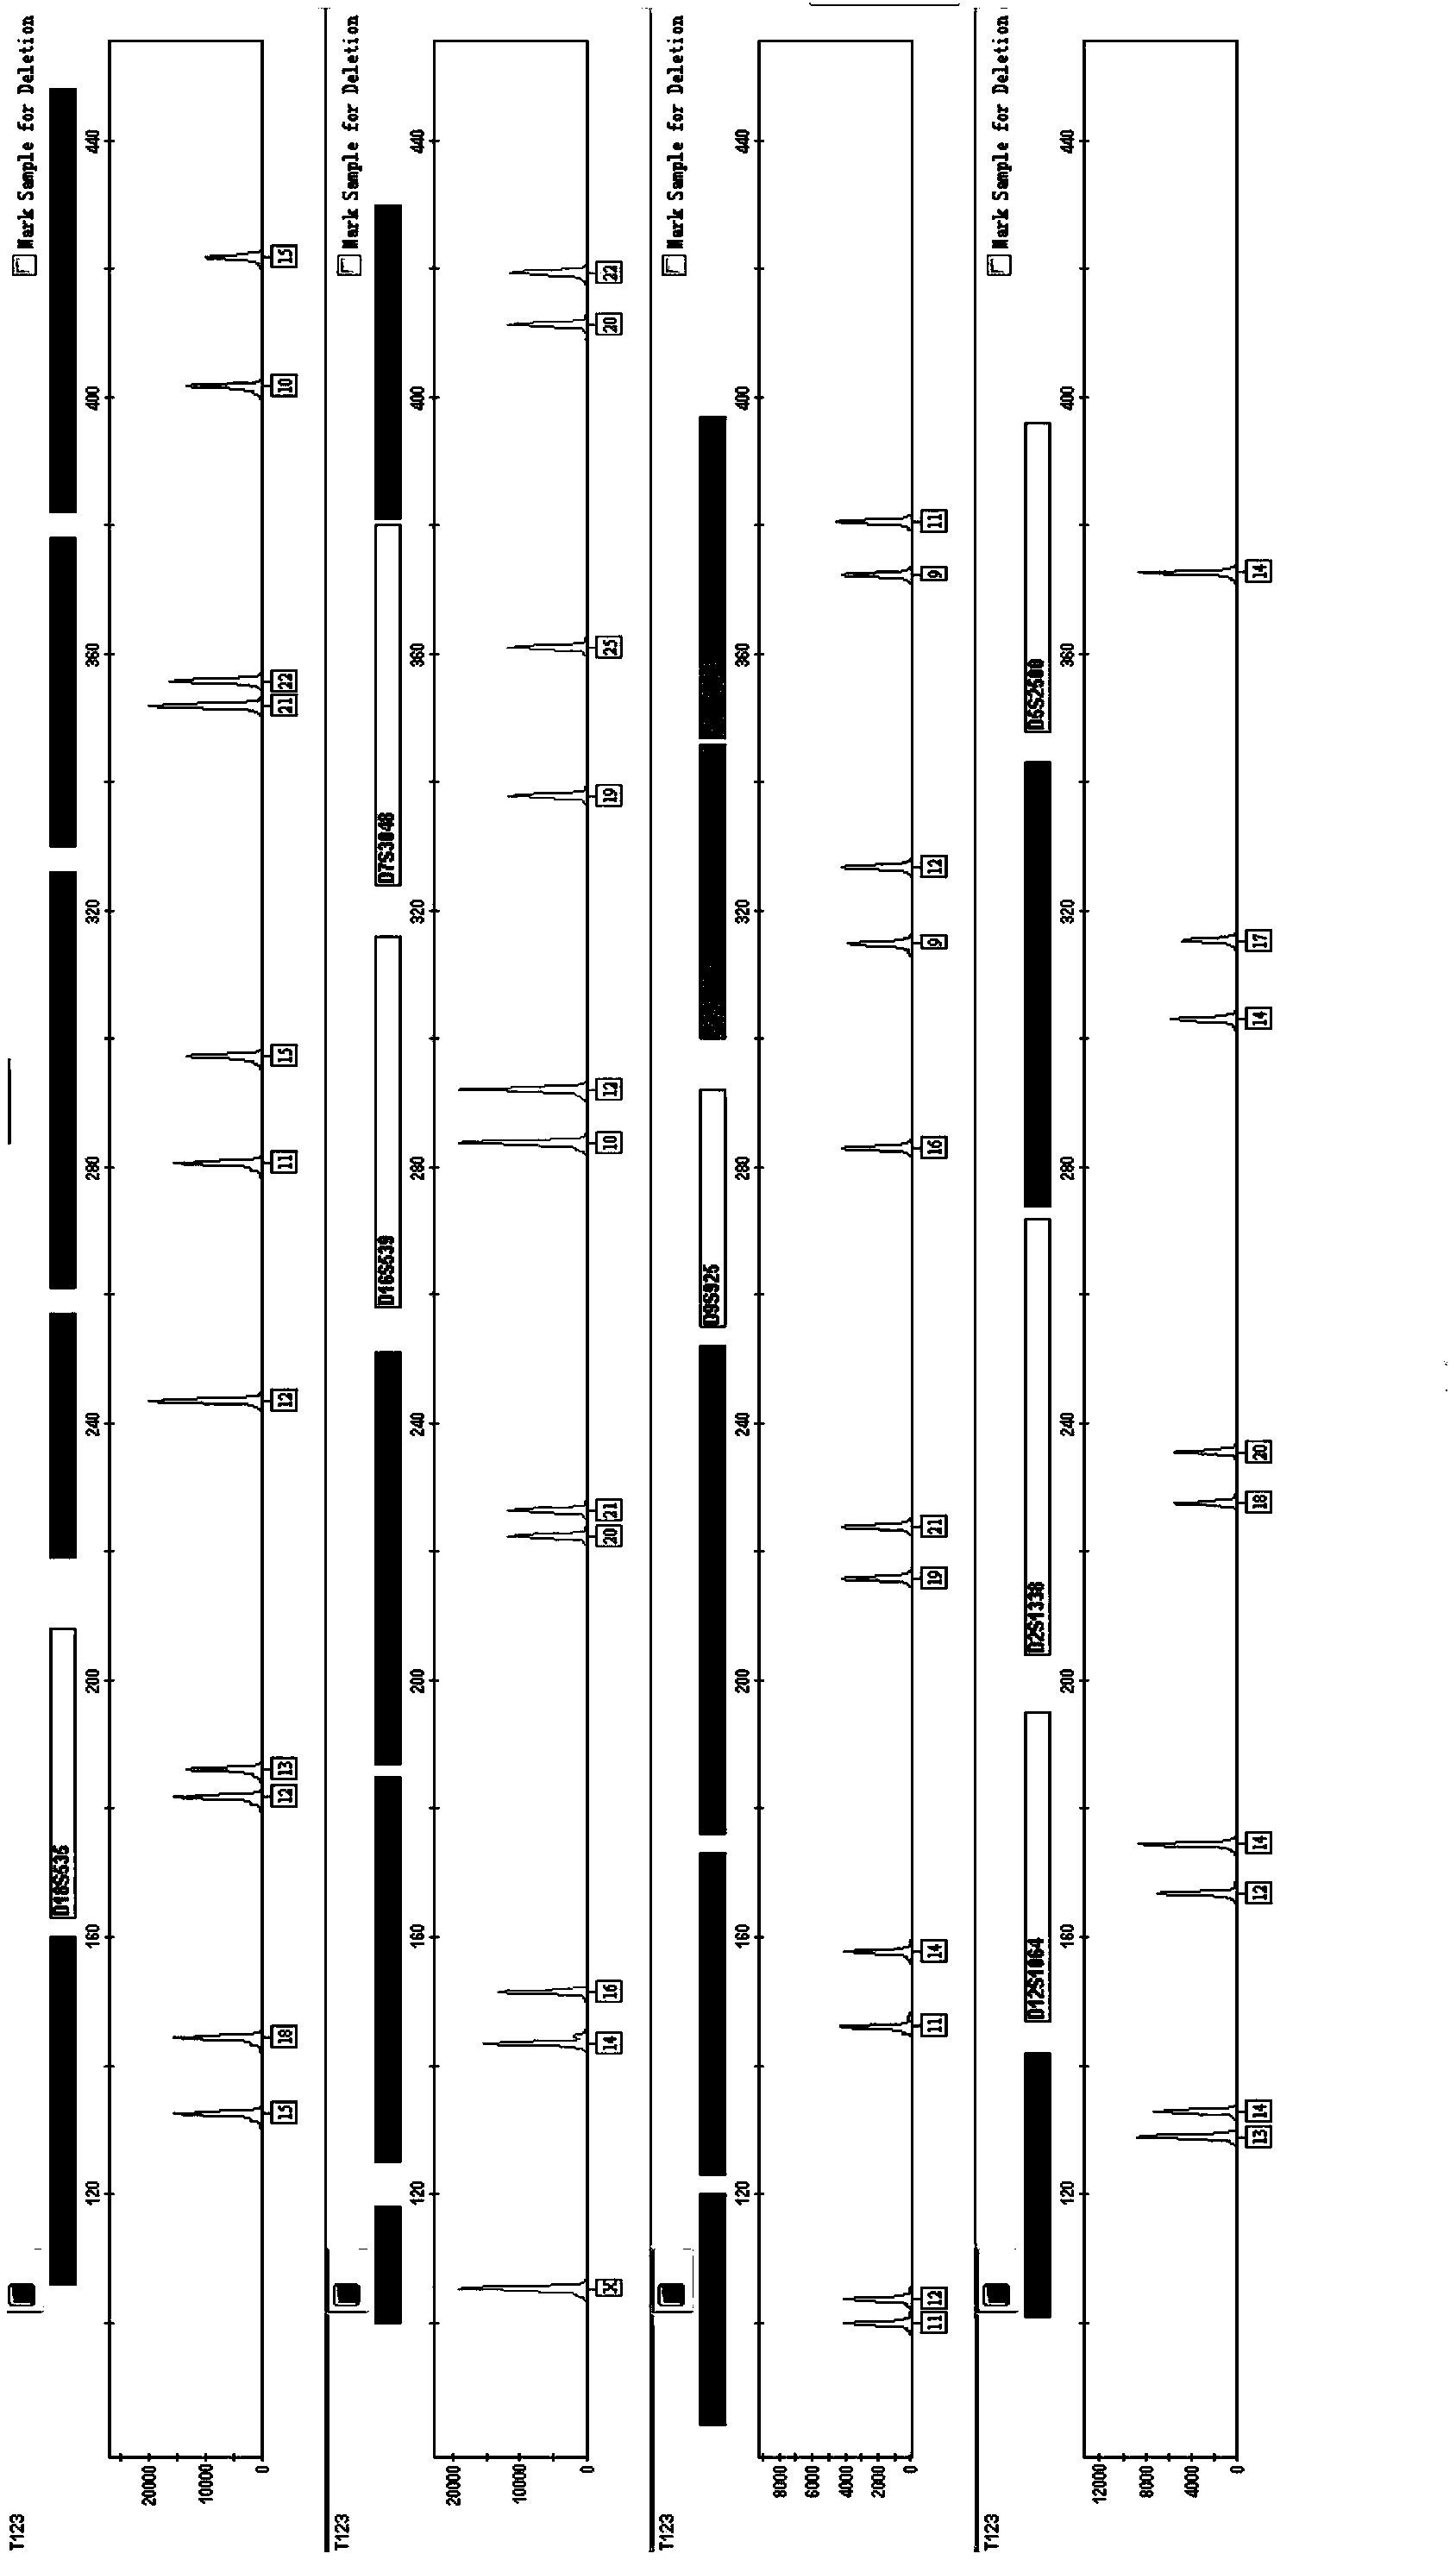 Composite amplification system of 23 short tandem repeat sequences and a kit